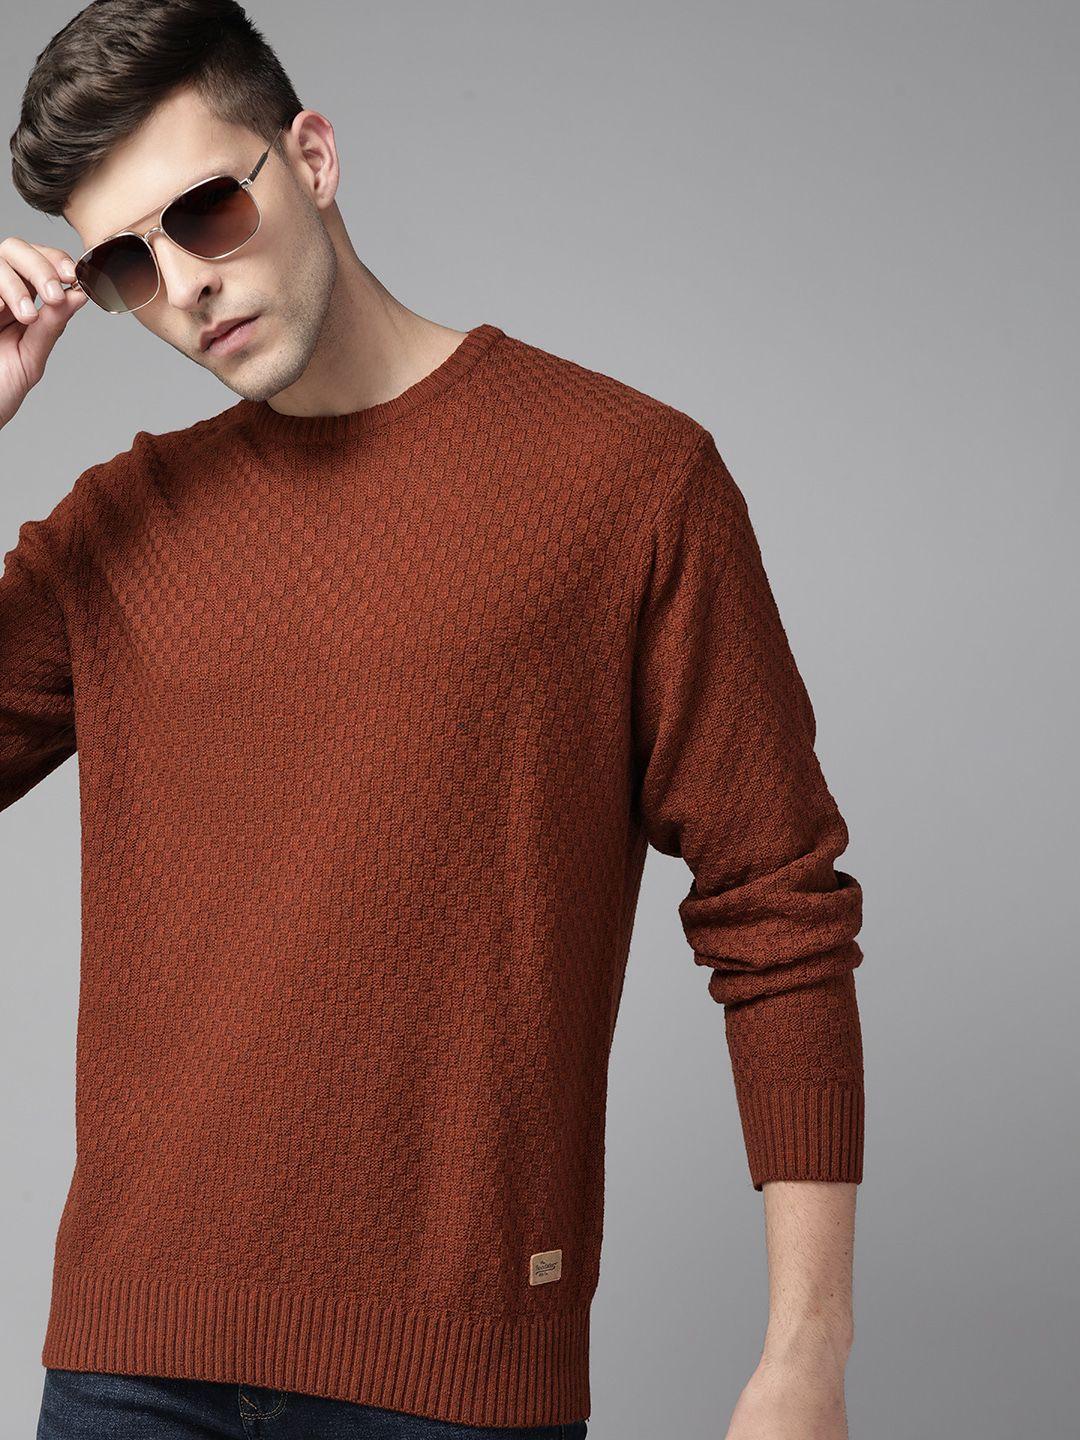 roadster-men-rust-brown-self-checked-pullover